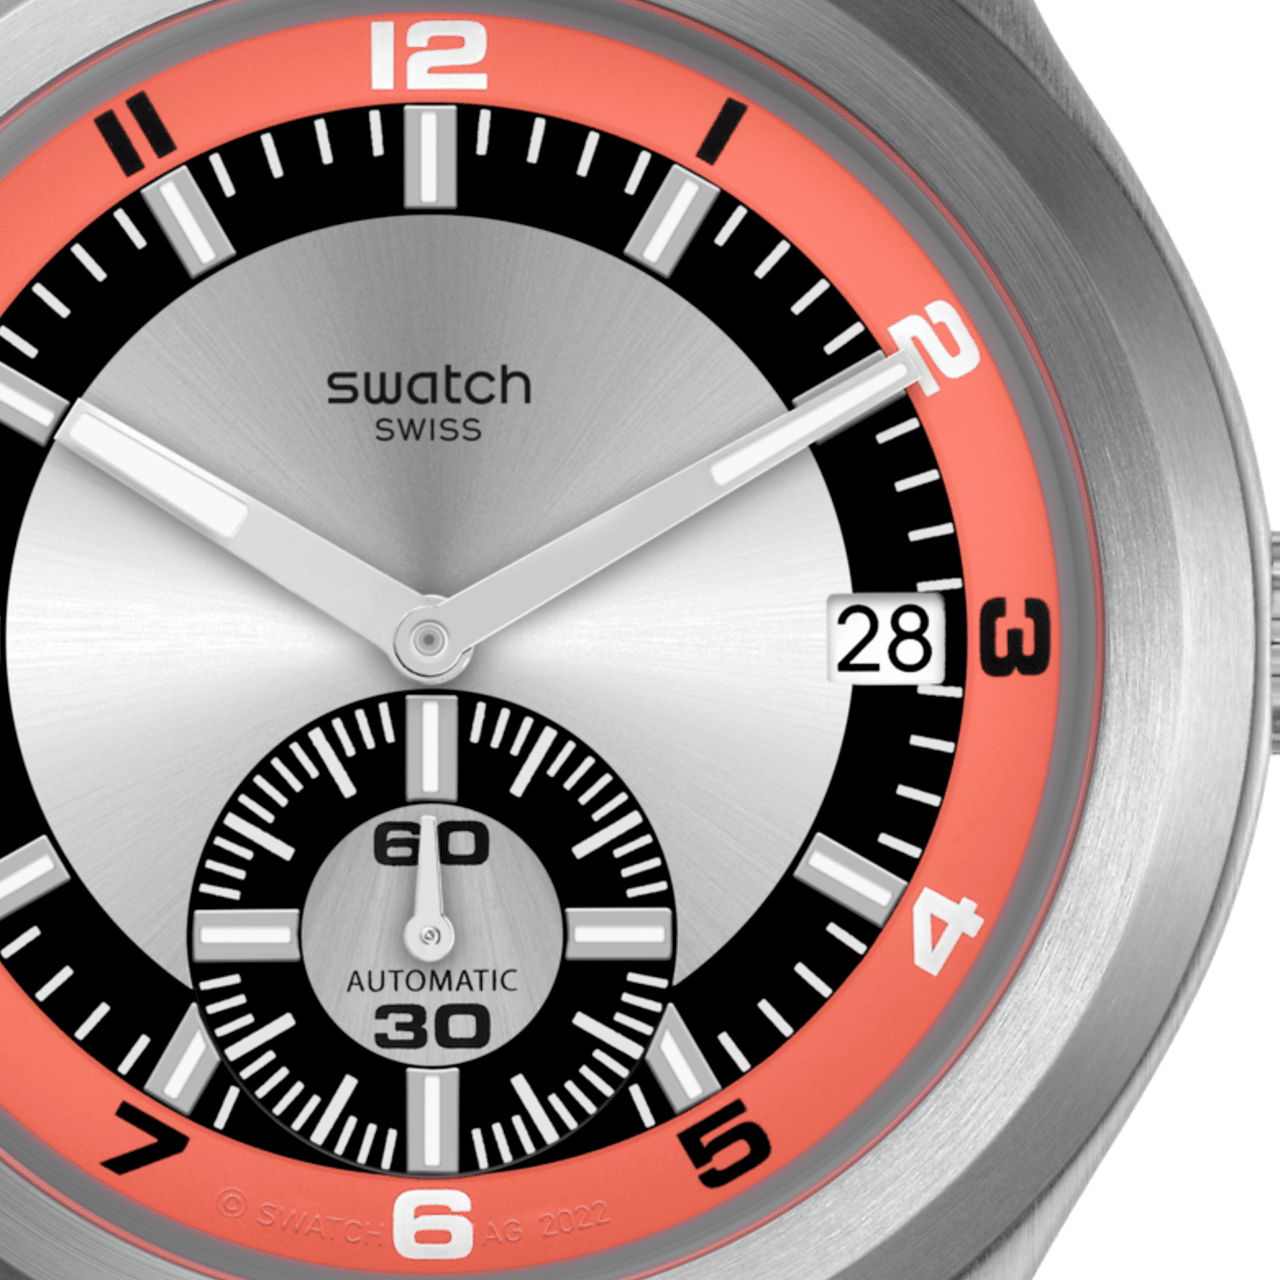 Swatch Watch Confidence 51 42mm